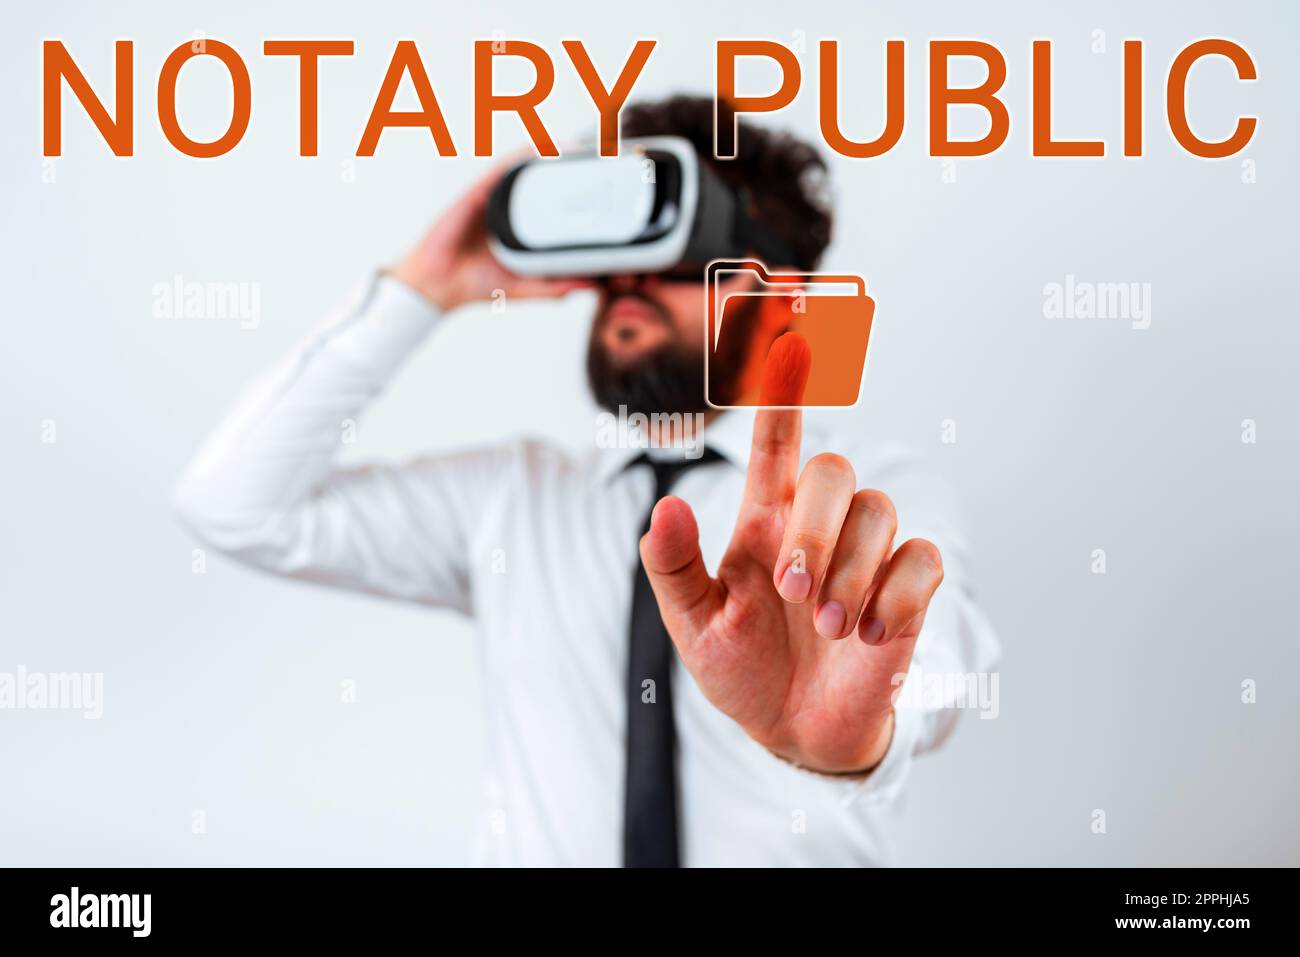 Conceptual display Notary Public. Business idea Legality Documentation Authorization Certification Contract Stock Photo